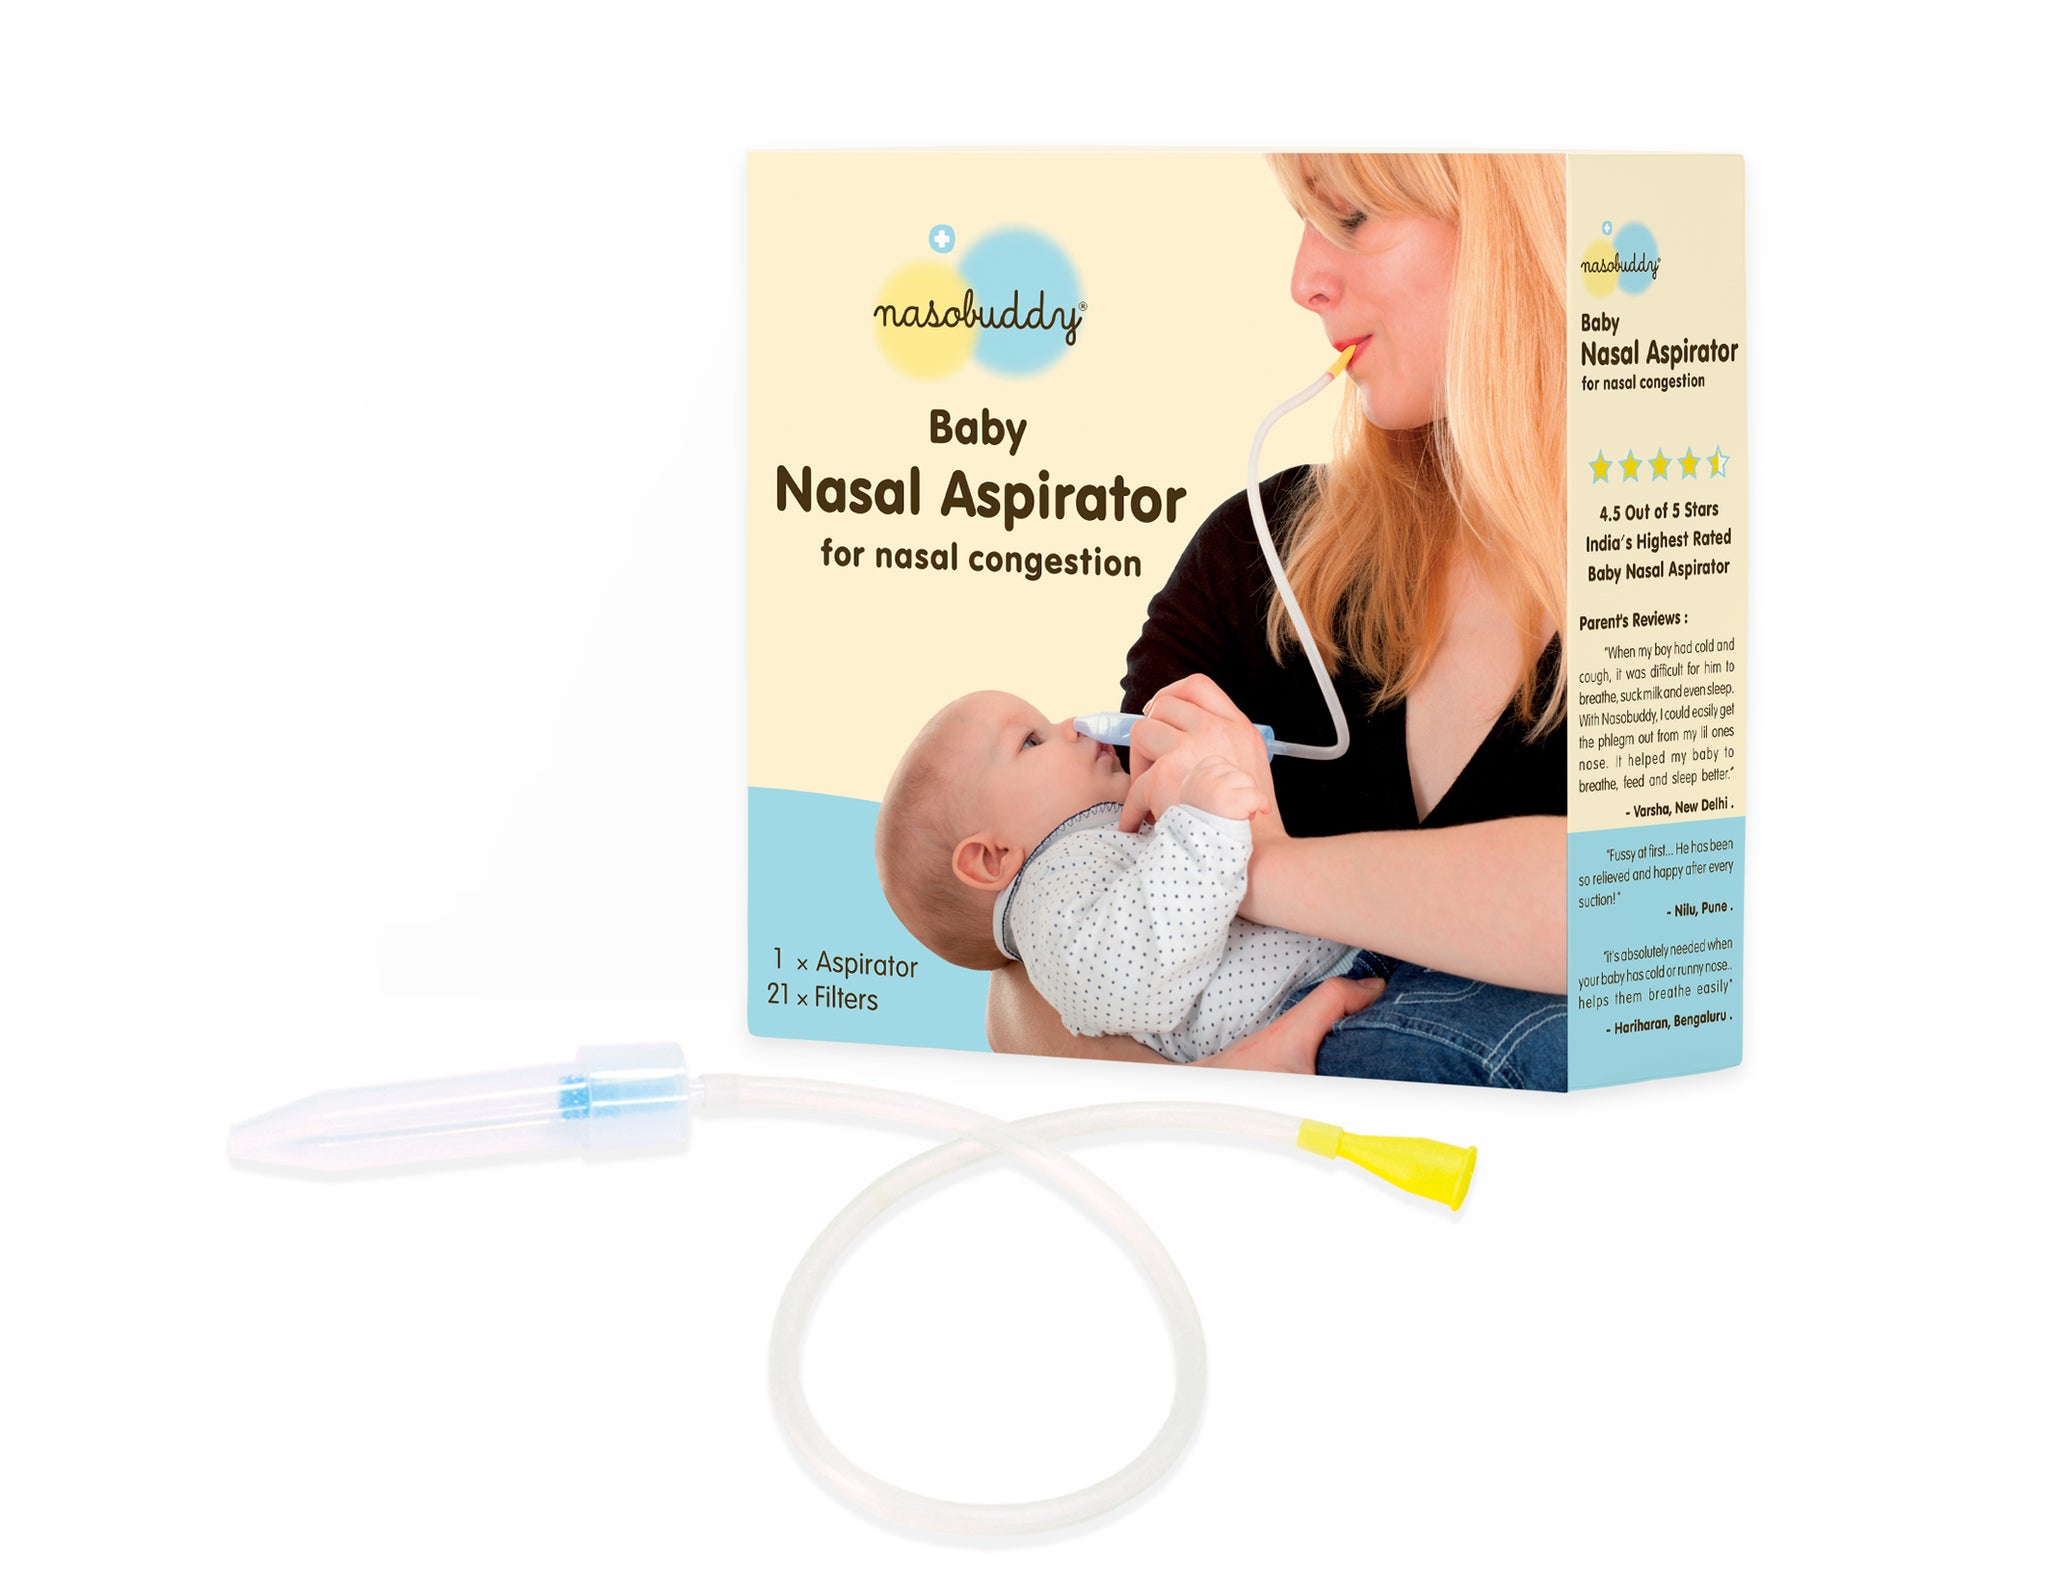 BuddsBuddy - Nasal tweezers are very necessary for the